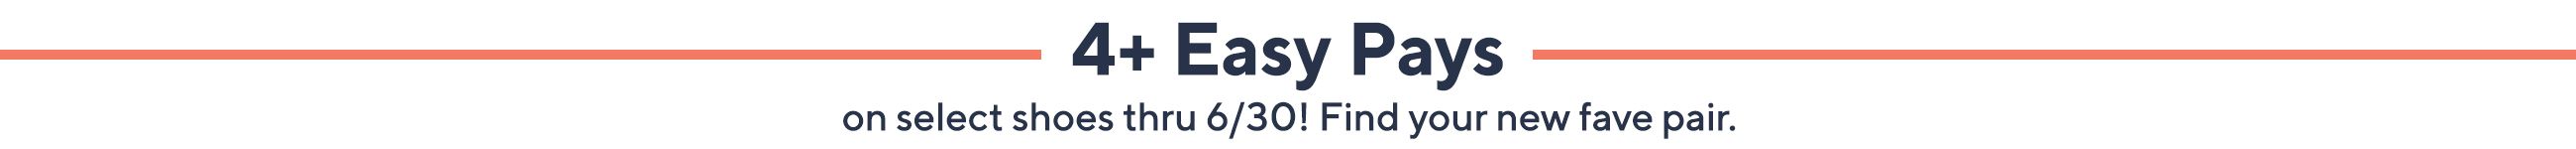 4+ Easy Pays on select shoes thru 6/30! Find your new fave pair.